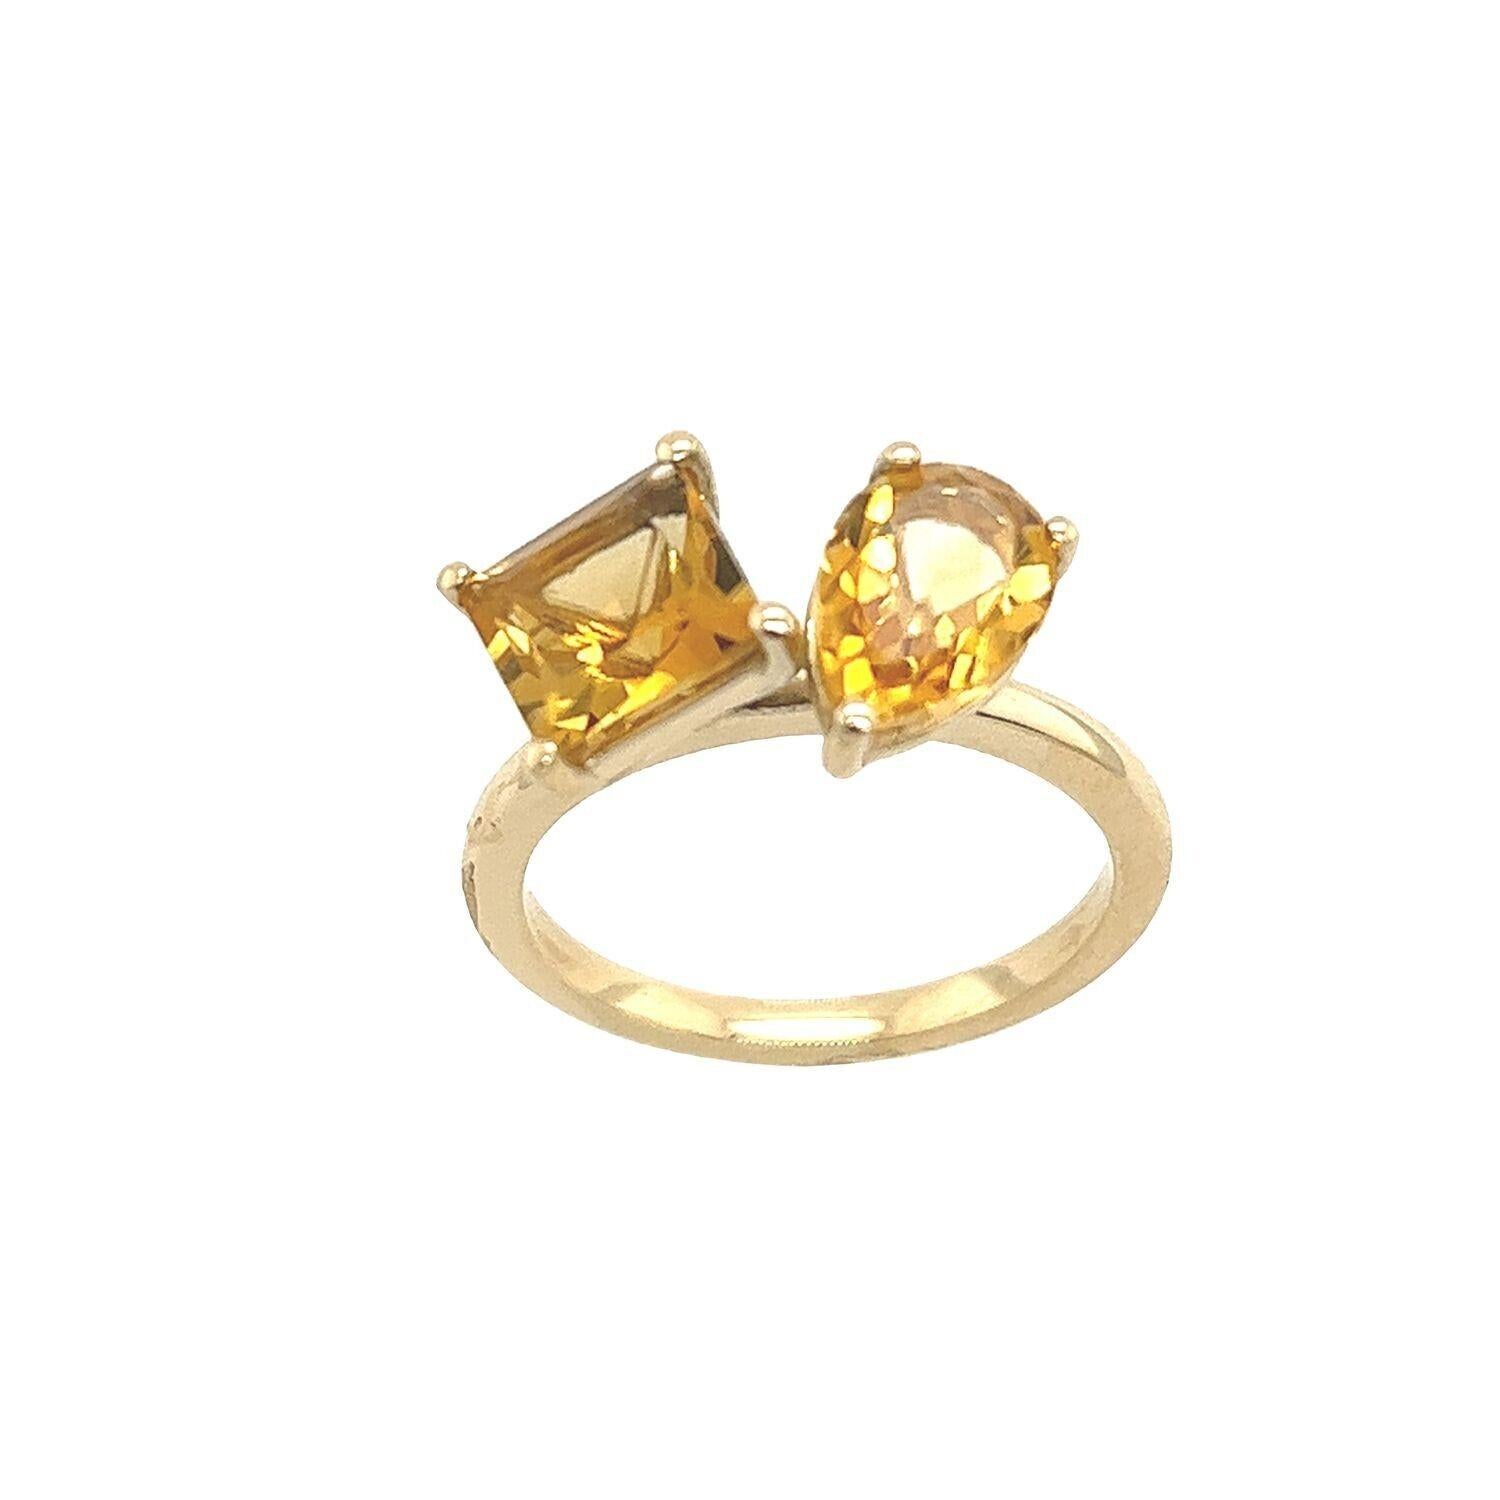 The Toi et Moi 2-stone Citrine cocktail ring Set in 14ct Yellow Gold setting, with a square shape and a pear shape Citrine, 2.74ct total Citrine weight. This ring is elegant and beautiful.

Additional Information:
Total Citrine Weight: 2.74ct
Width